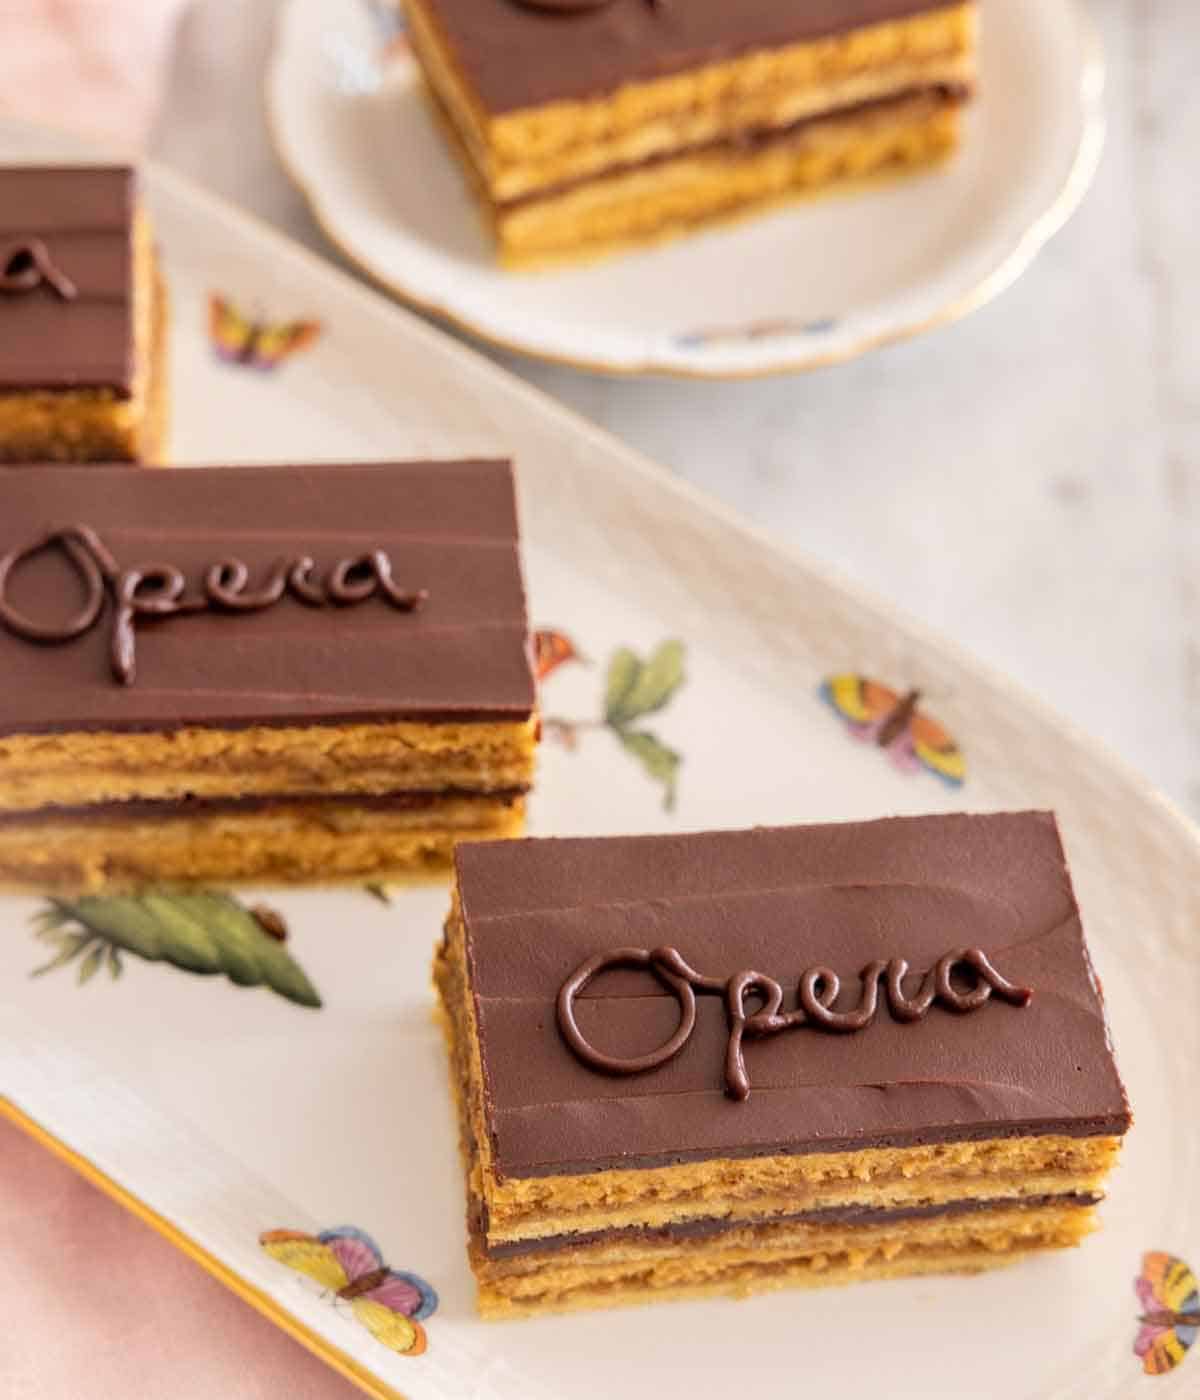 A platter with three opera cake pieces with cursive "opera" written on the cake.